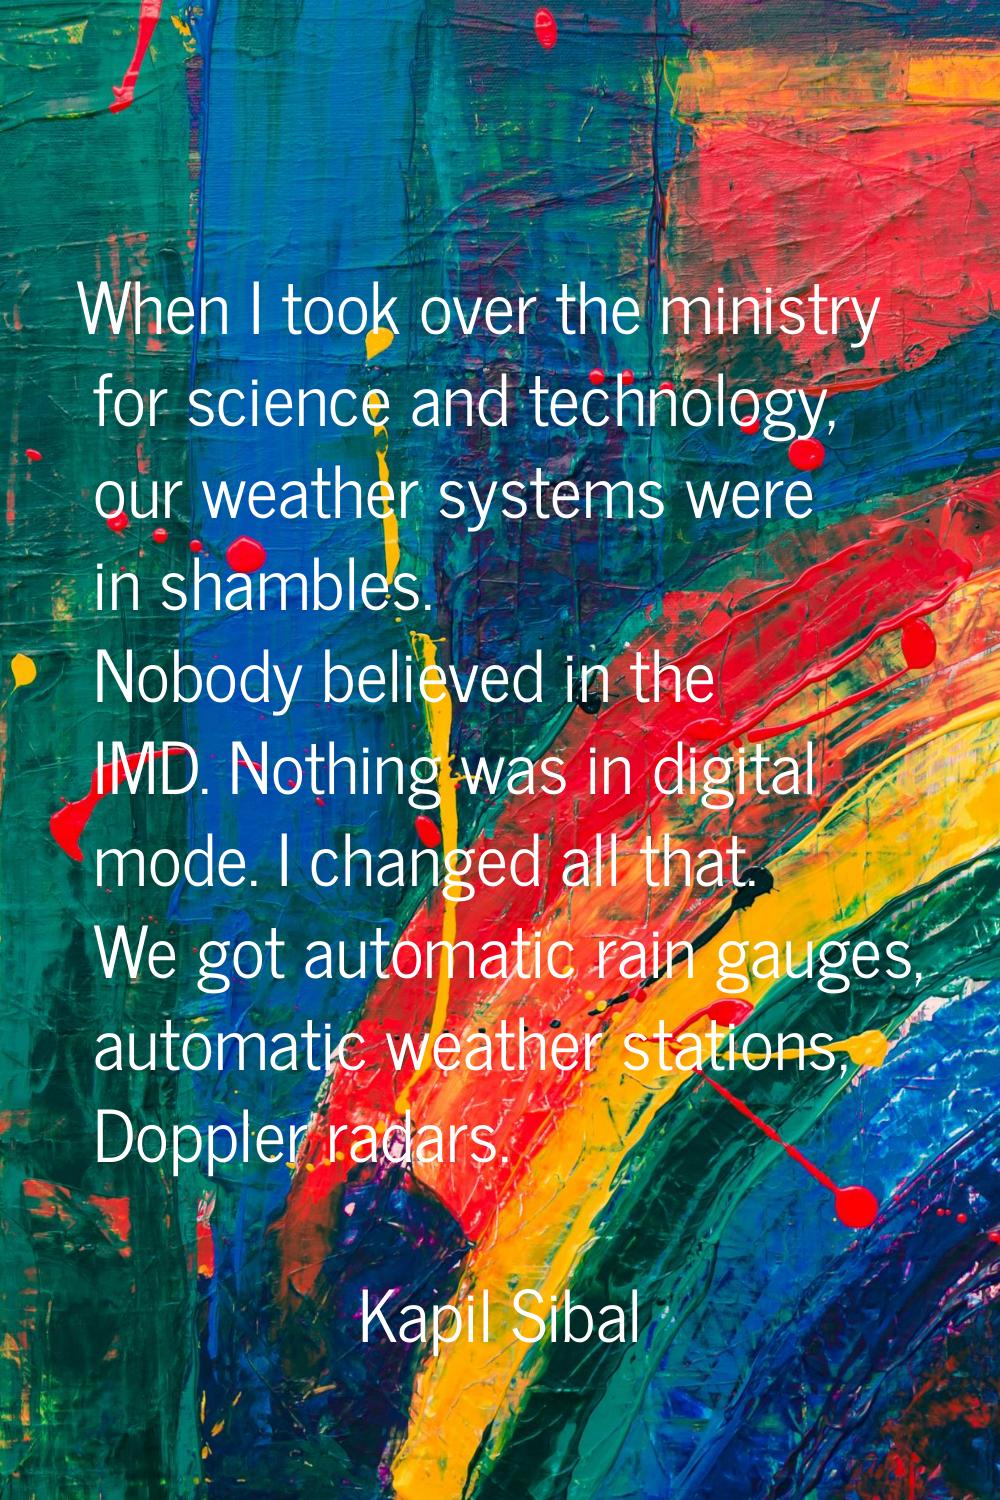 When I took over the ministry for science and technology, our weather systems were in shambles. Nob